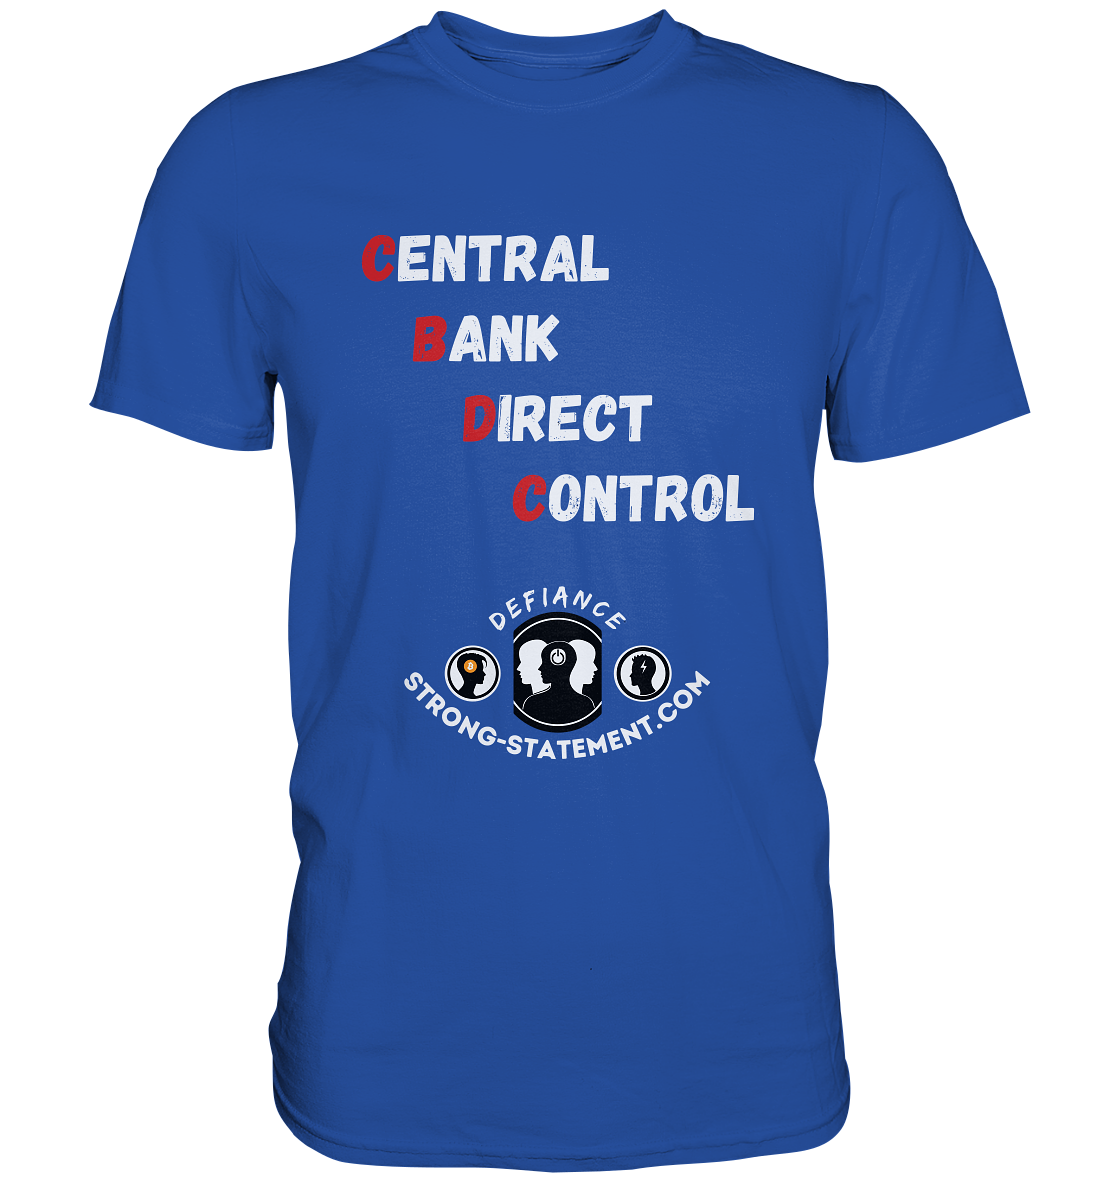 CENTRAL BANK DIRECT CONTROL - Defiance - Strong-Statement.com - Classic Shirt